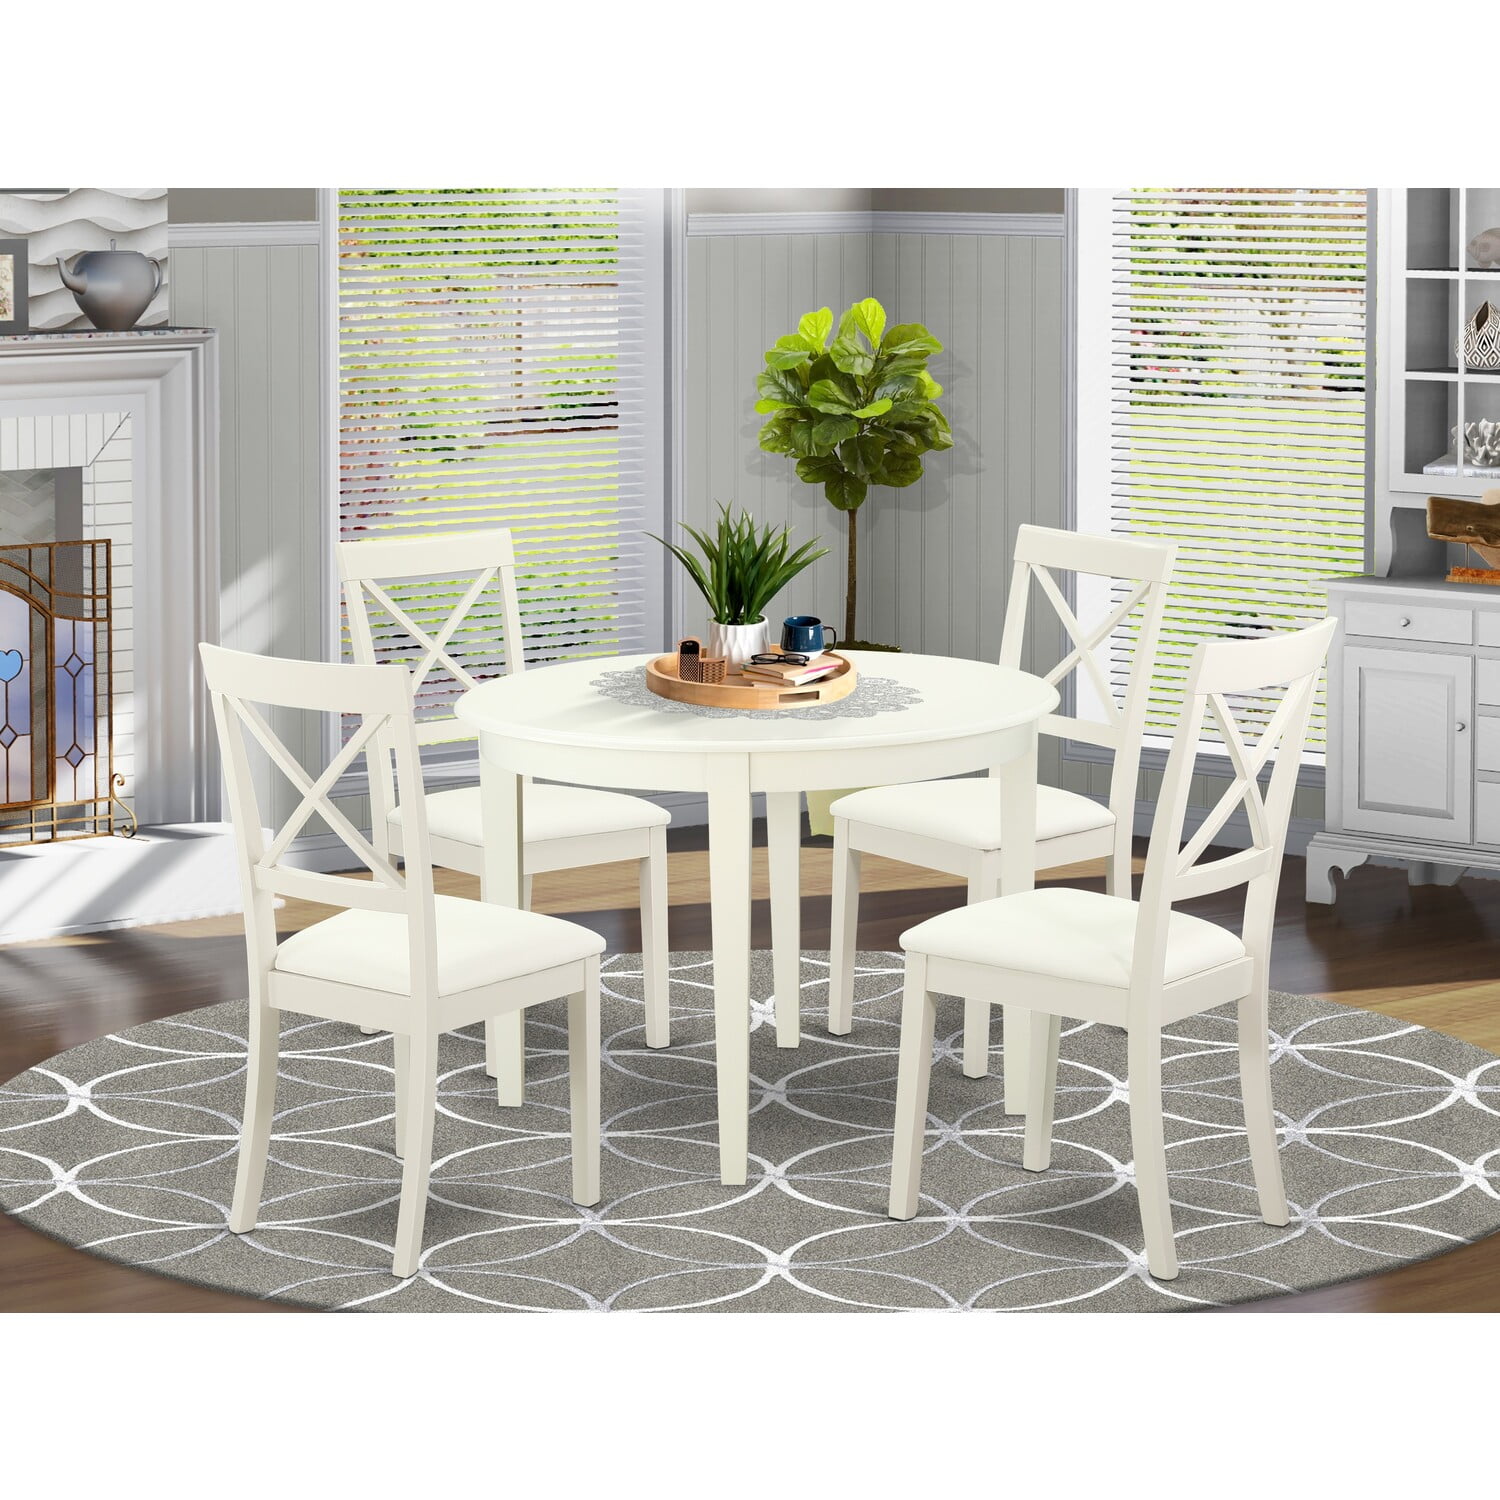 BOST5LWHLC 5 Pc small Kitchen Table setround Kitchen Table and 4